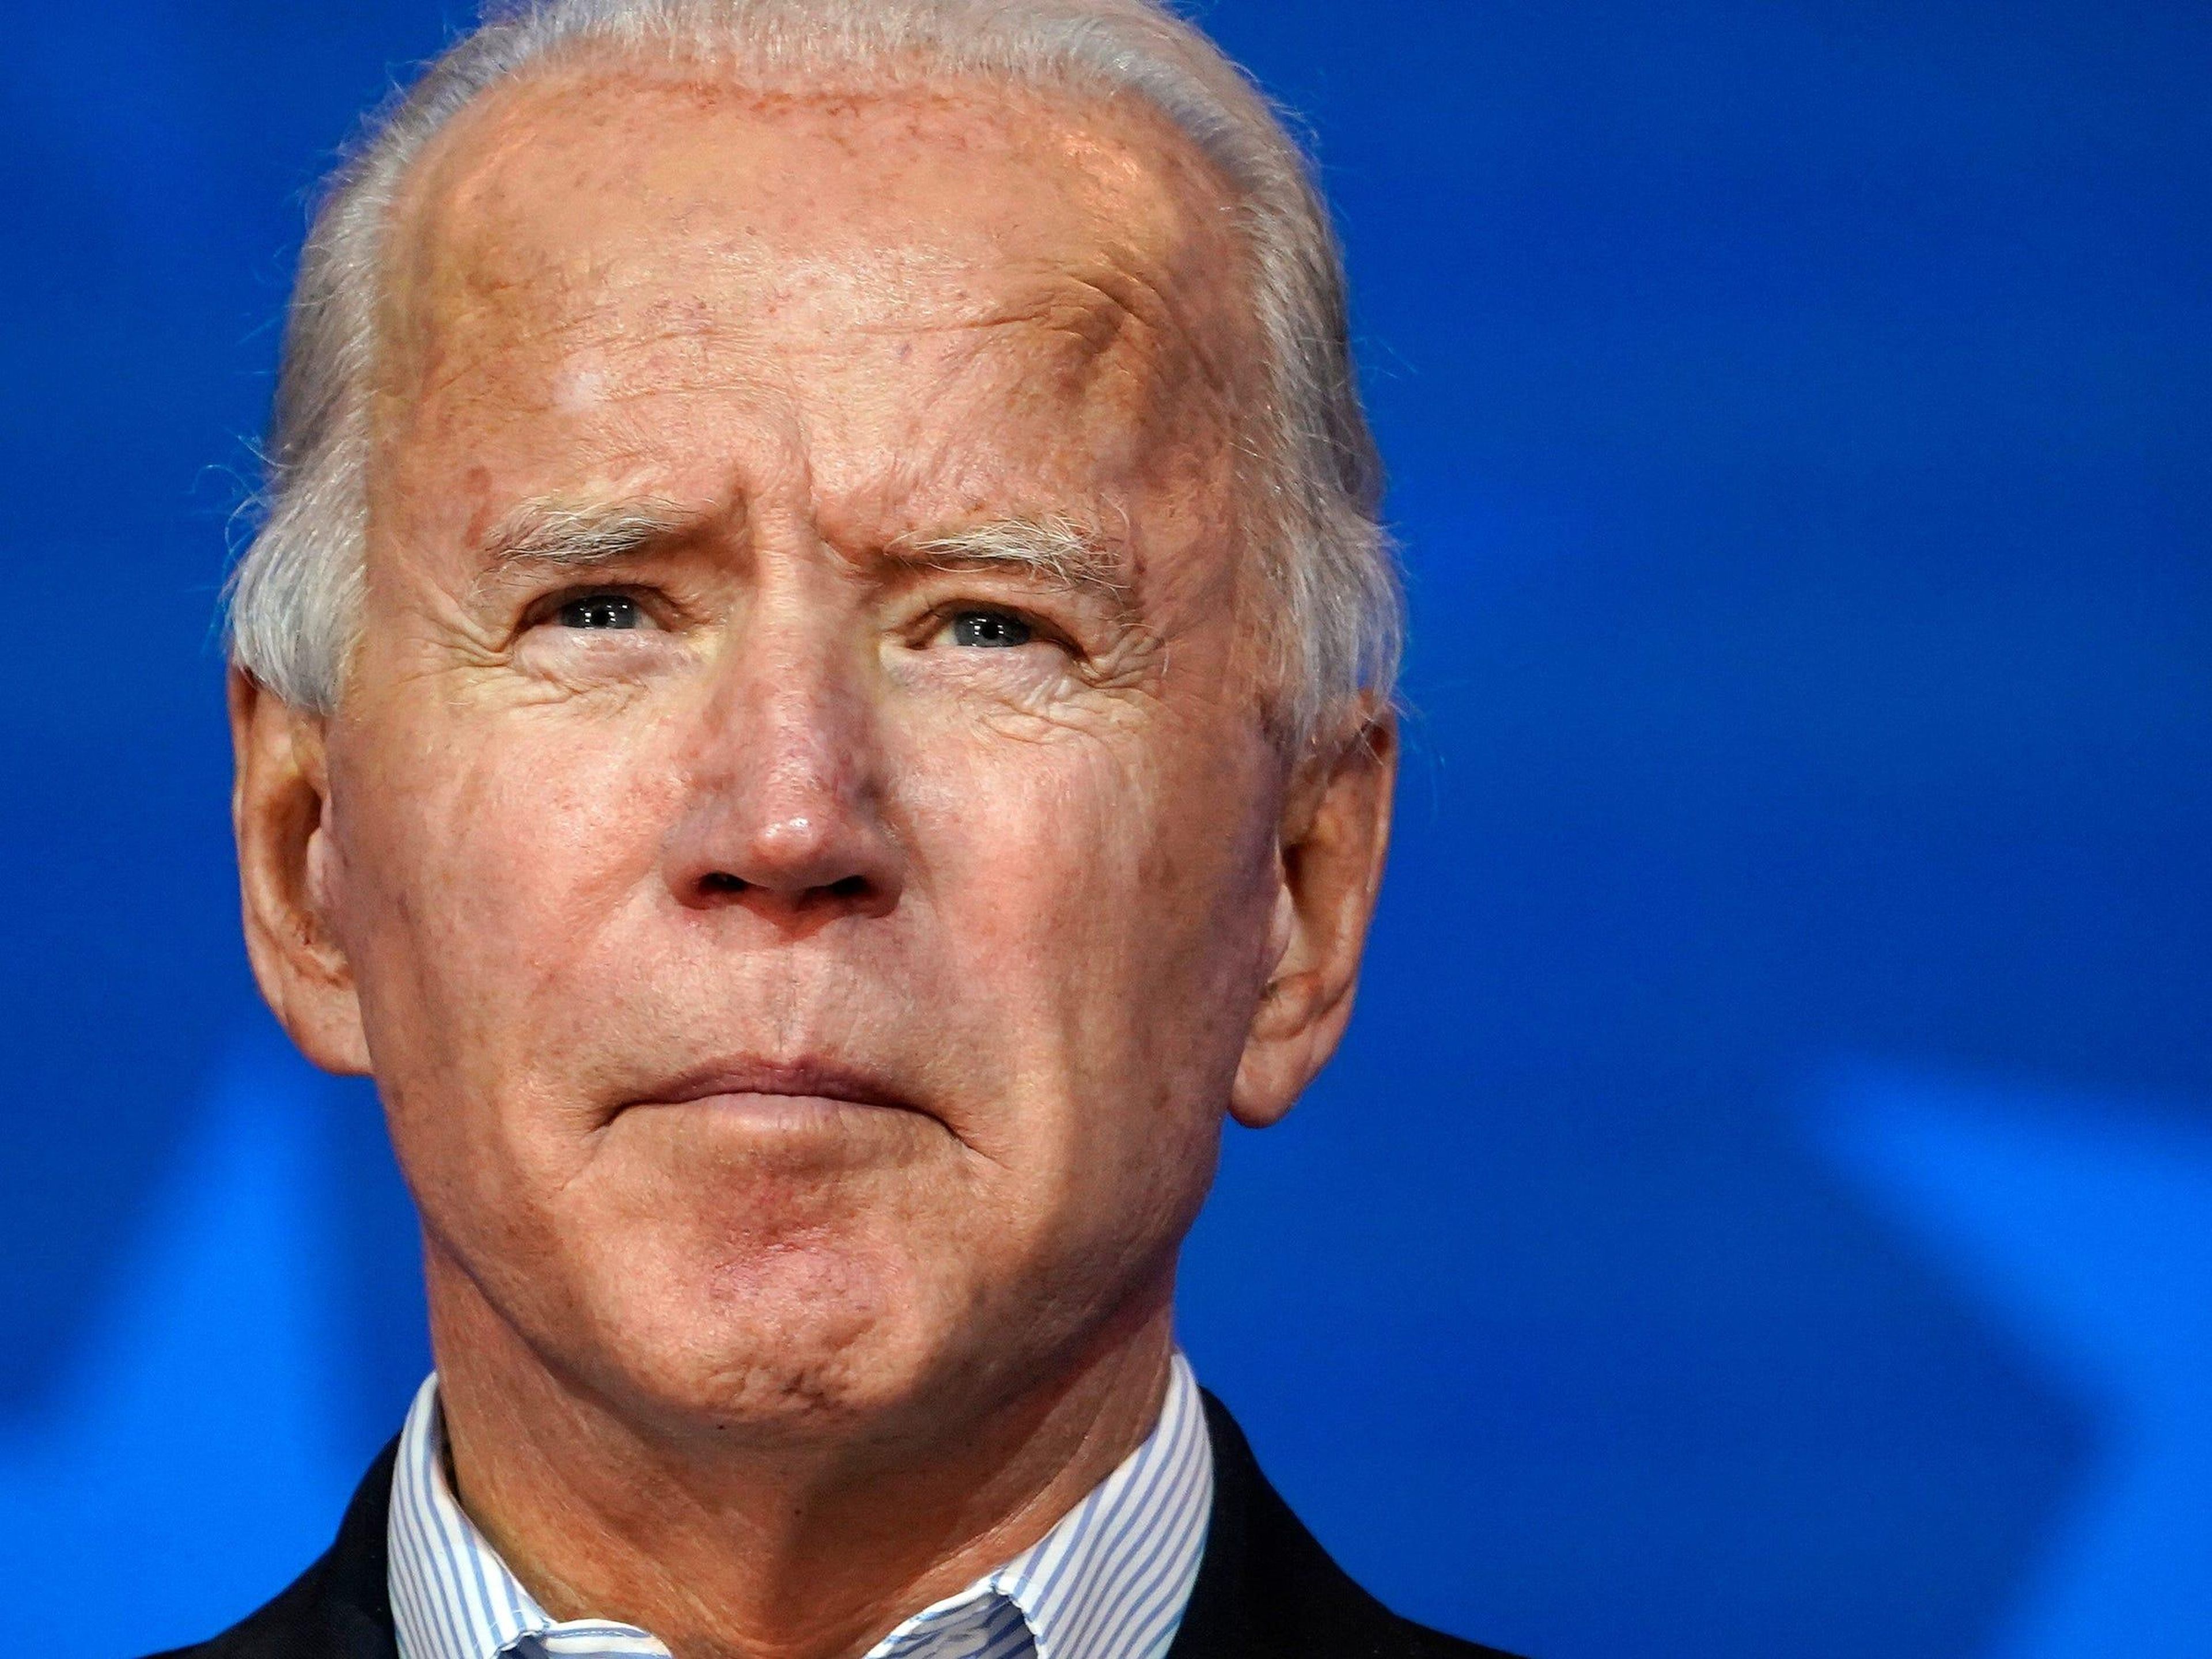 'We're gonna win this race': Biden doesn't declare victory in Friday-night speech, instead focusing in on on unity and combatting the COVID-19 pandemic